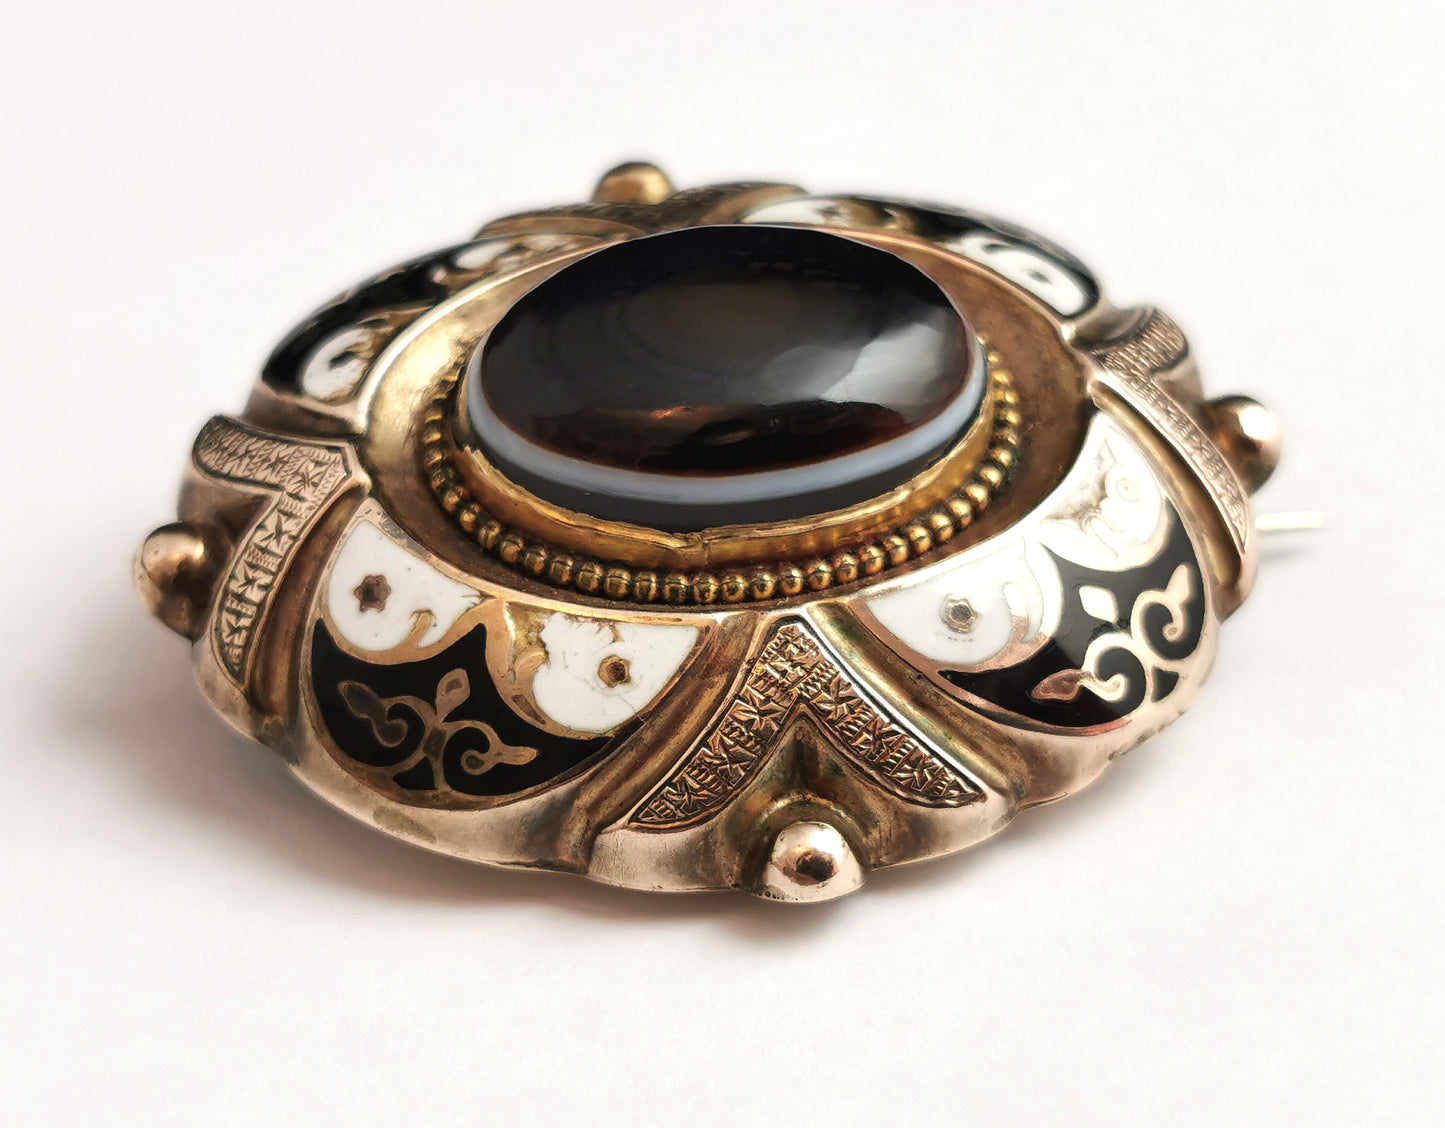 Antique Banded agate mourning brooch, 9ct gold, hairwork, Black and White enamel